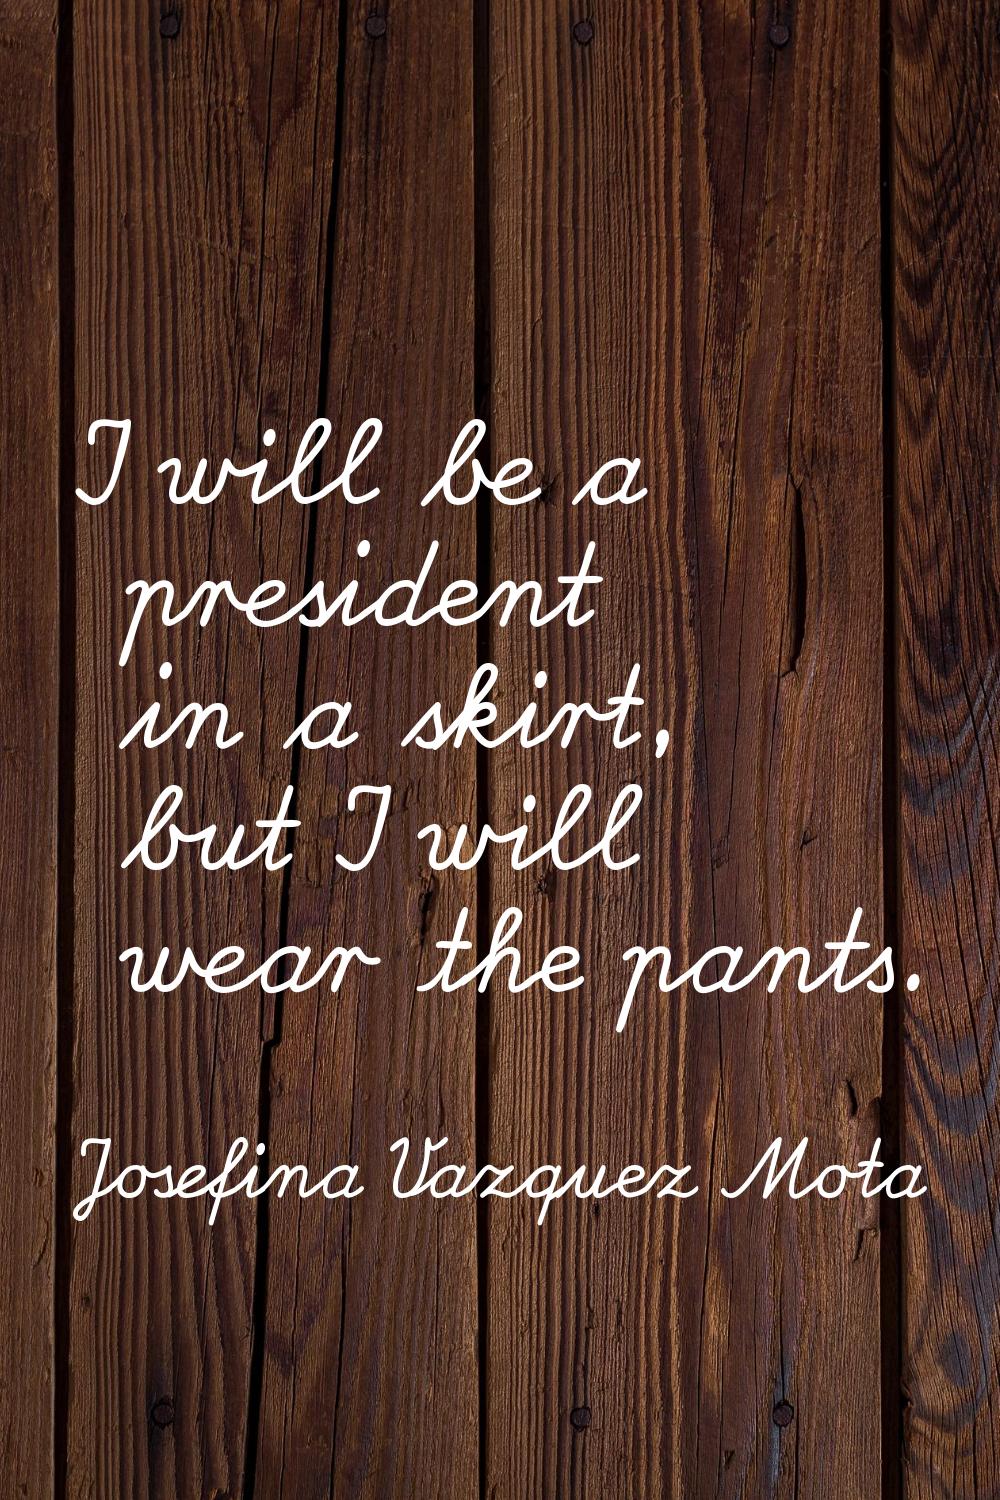 I will be a president in a skirt, but I will wear the pants.